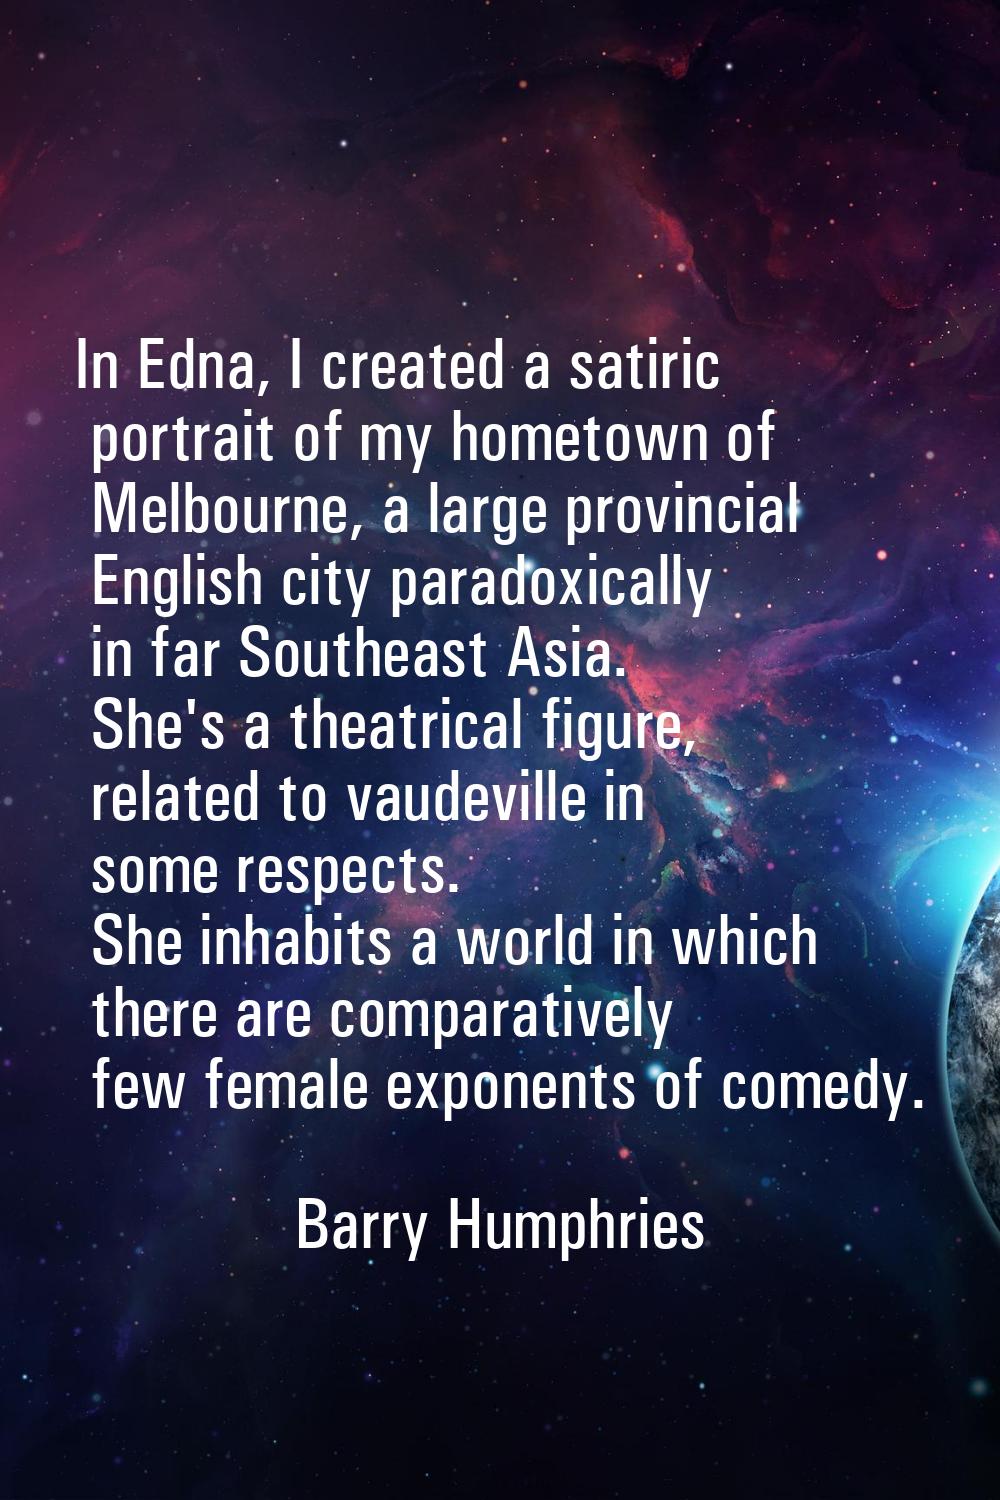 In Edna, I created a satiric portrait of my hometown of Melbourne, a large provincial English city 